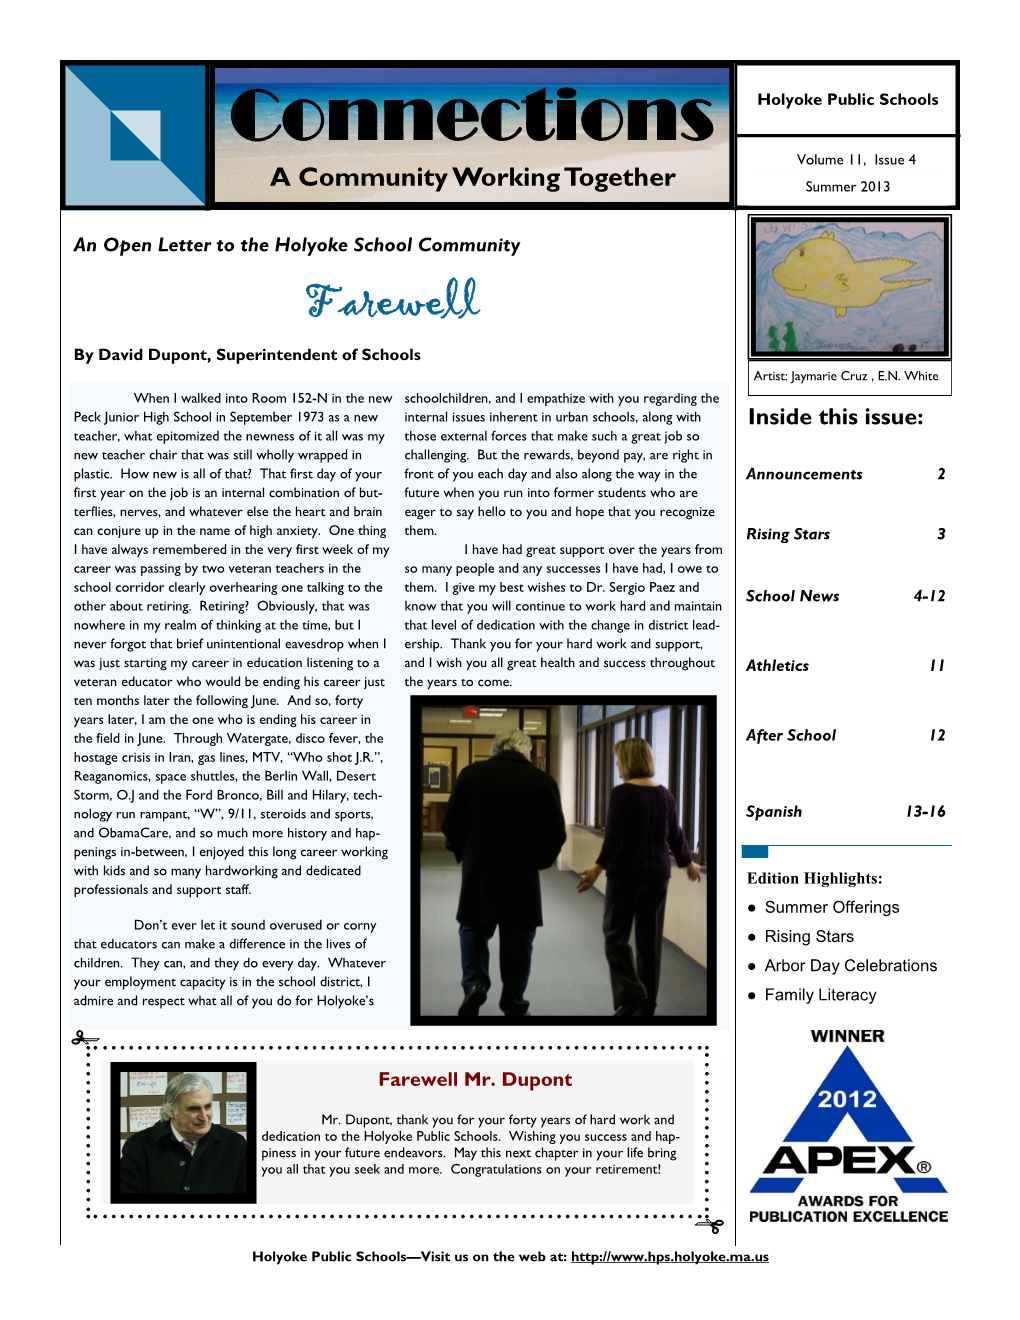 Connections Holyoke Public Schools Volume 11, Issue 4 a Community Working Together Summer 2013